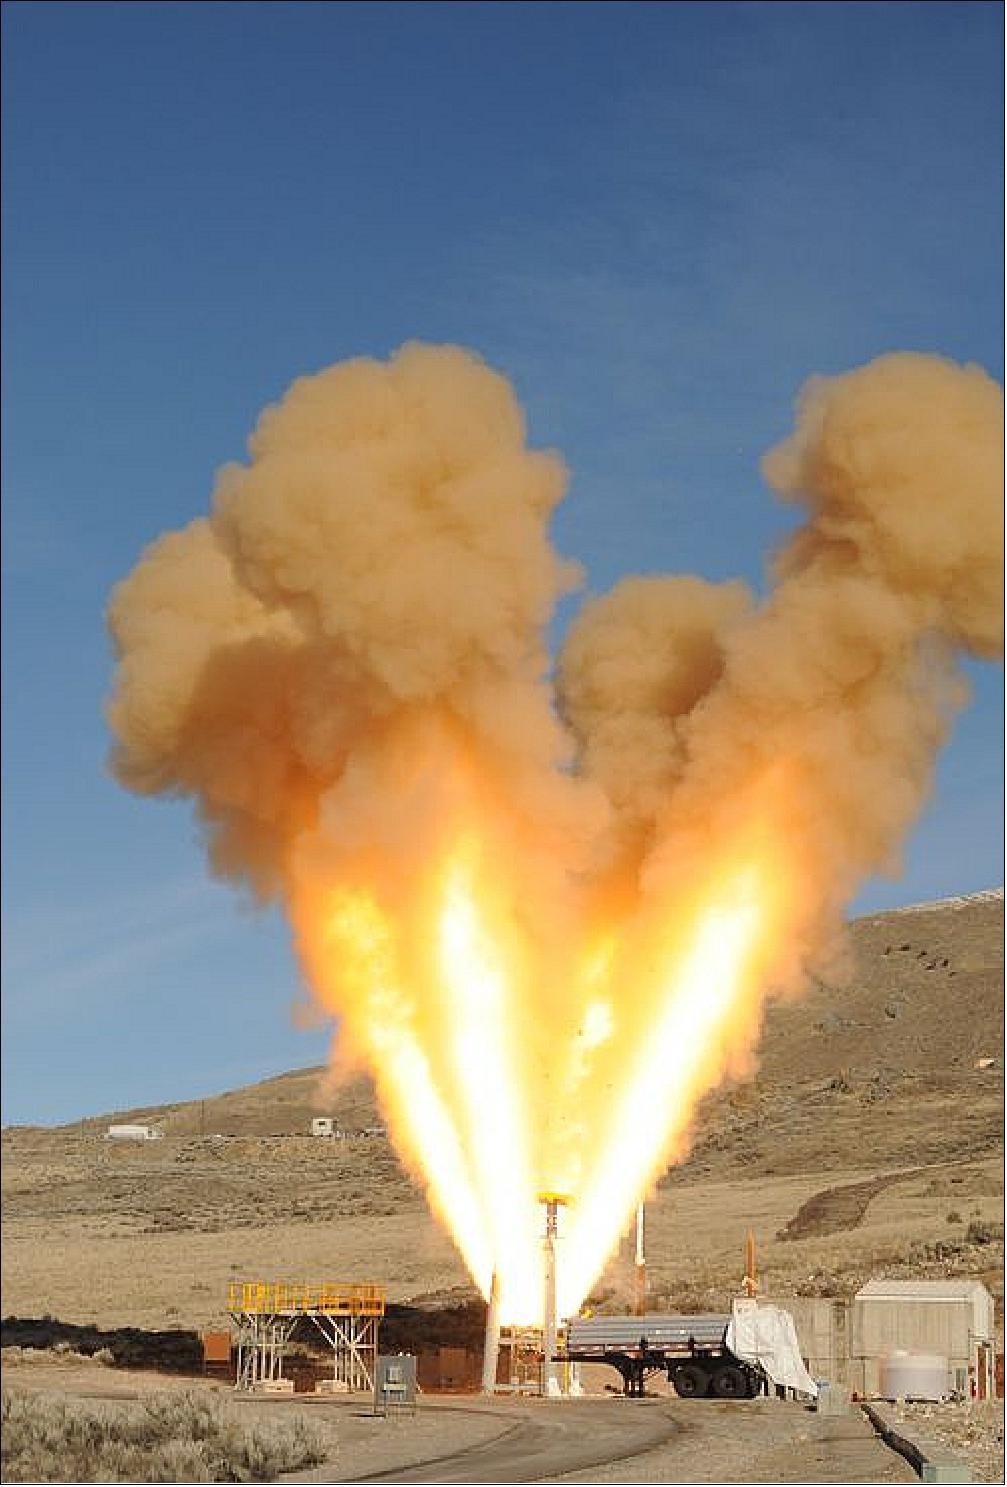 Figure 44: Today’s test firing of the Northrop Grumman-manufactured launch abort motor in Promontory, Utah, confirmed the motor can activate within milliseconds and will perform as designed under cold temperatures (image credit: Northrop Grumman, NASA)